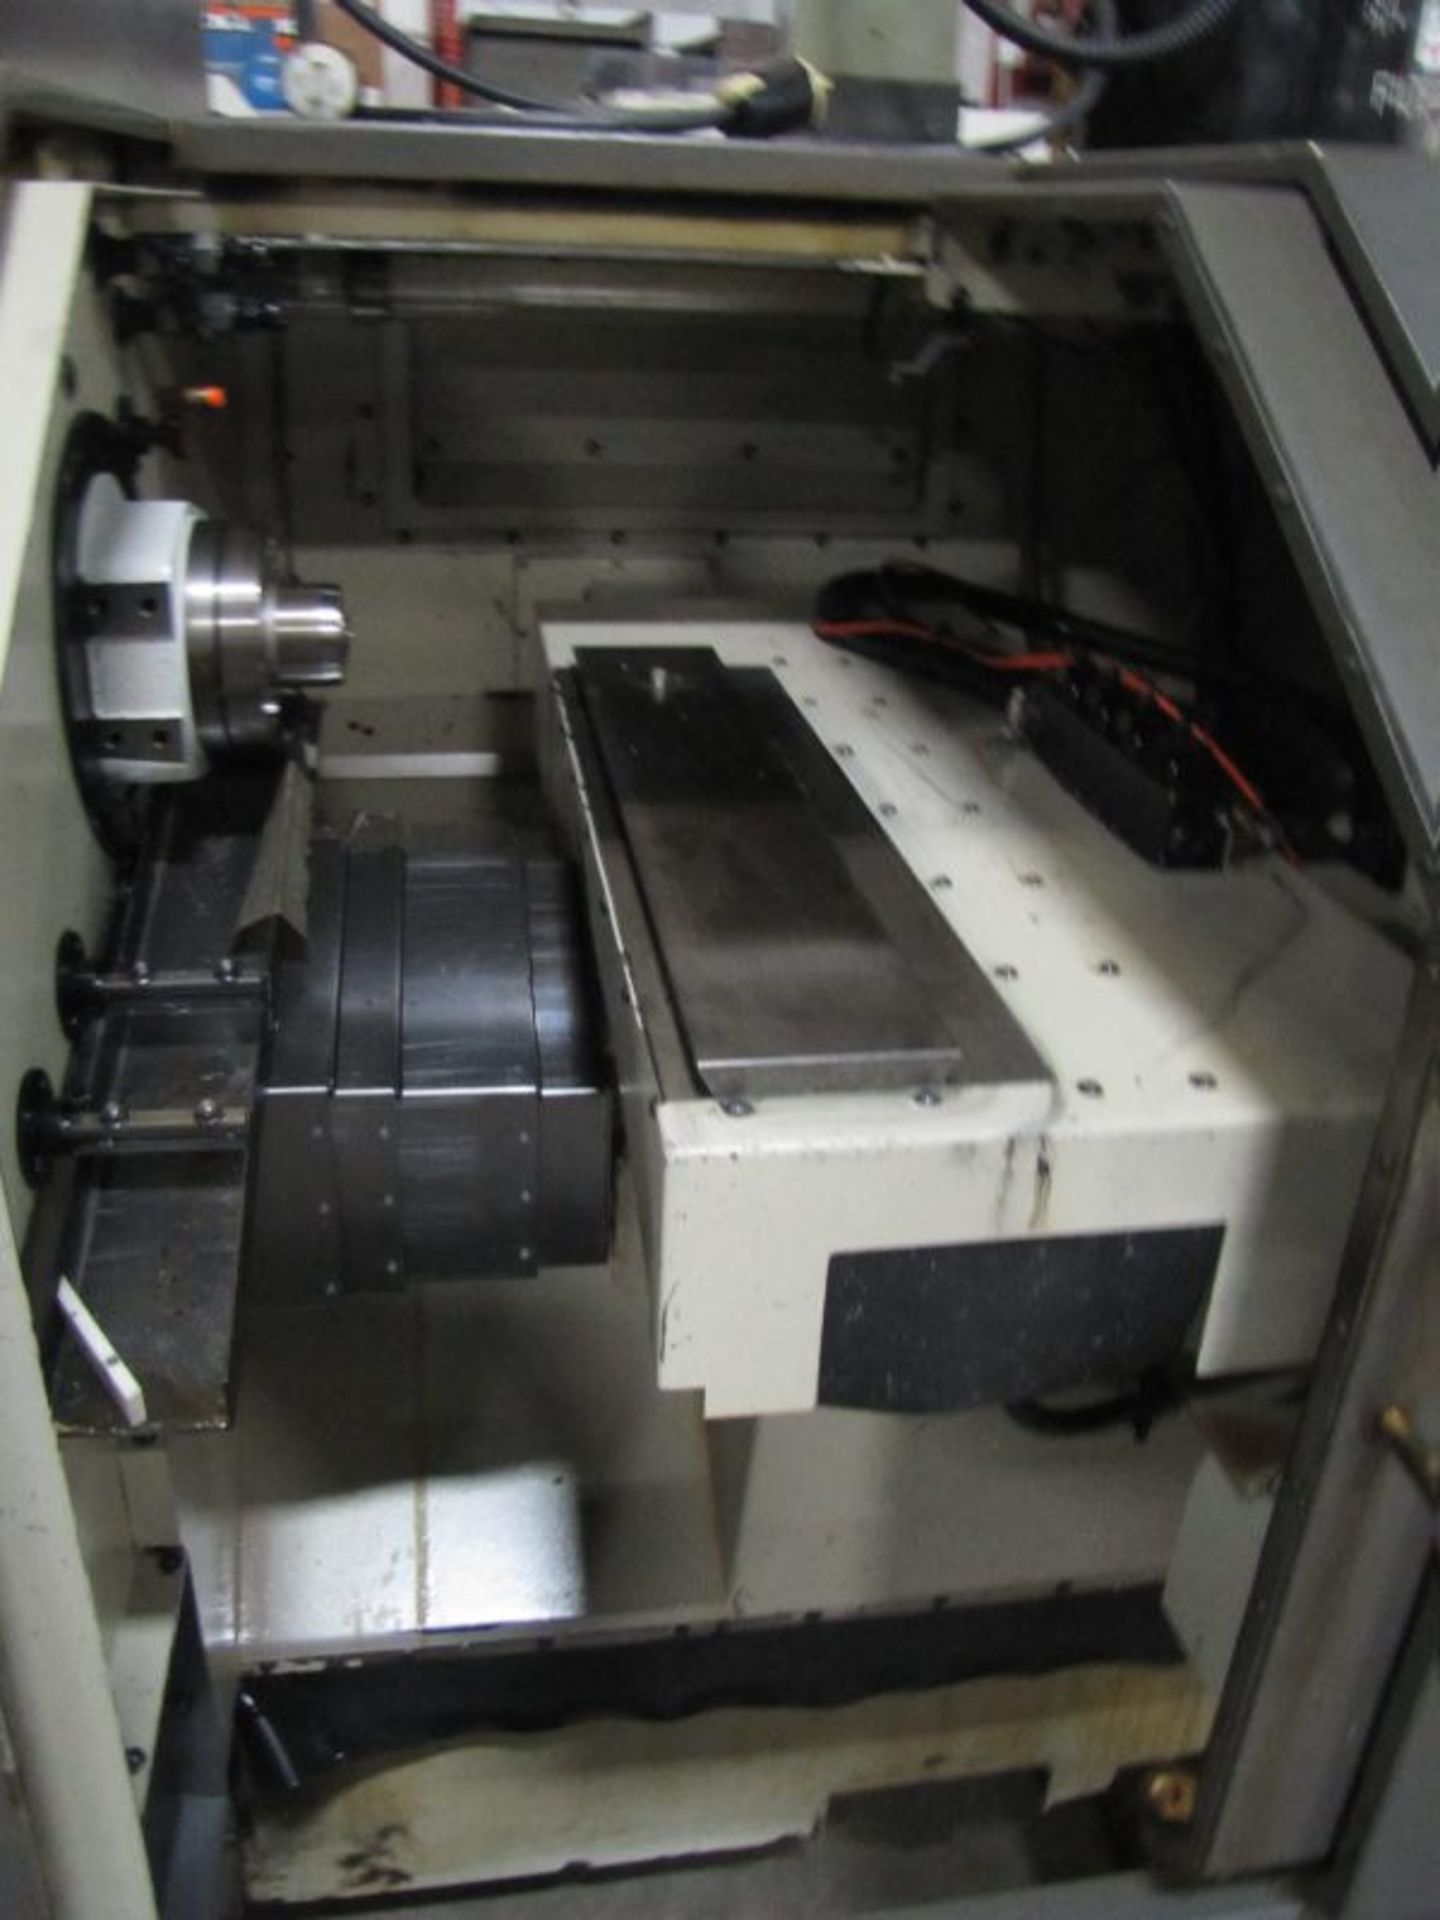 Hardinge Conquest Model CS-GT Super Precision Gang Tool CNC Lathe, S/N: GT-203, With GE Fanuc Series - Image 3 of 8